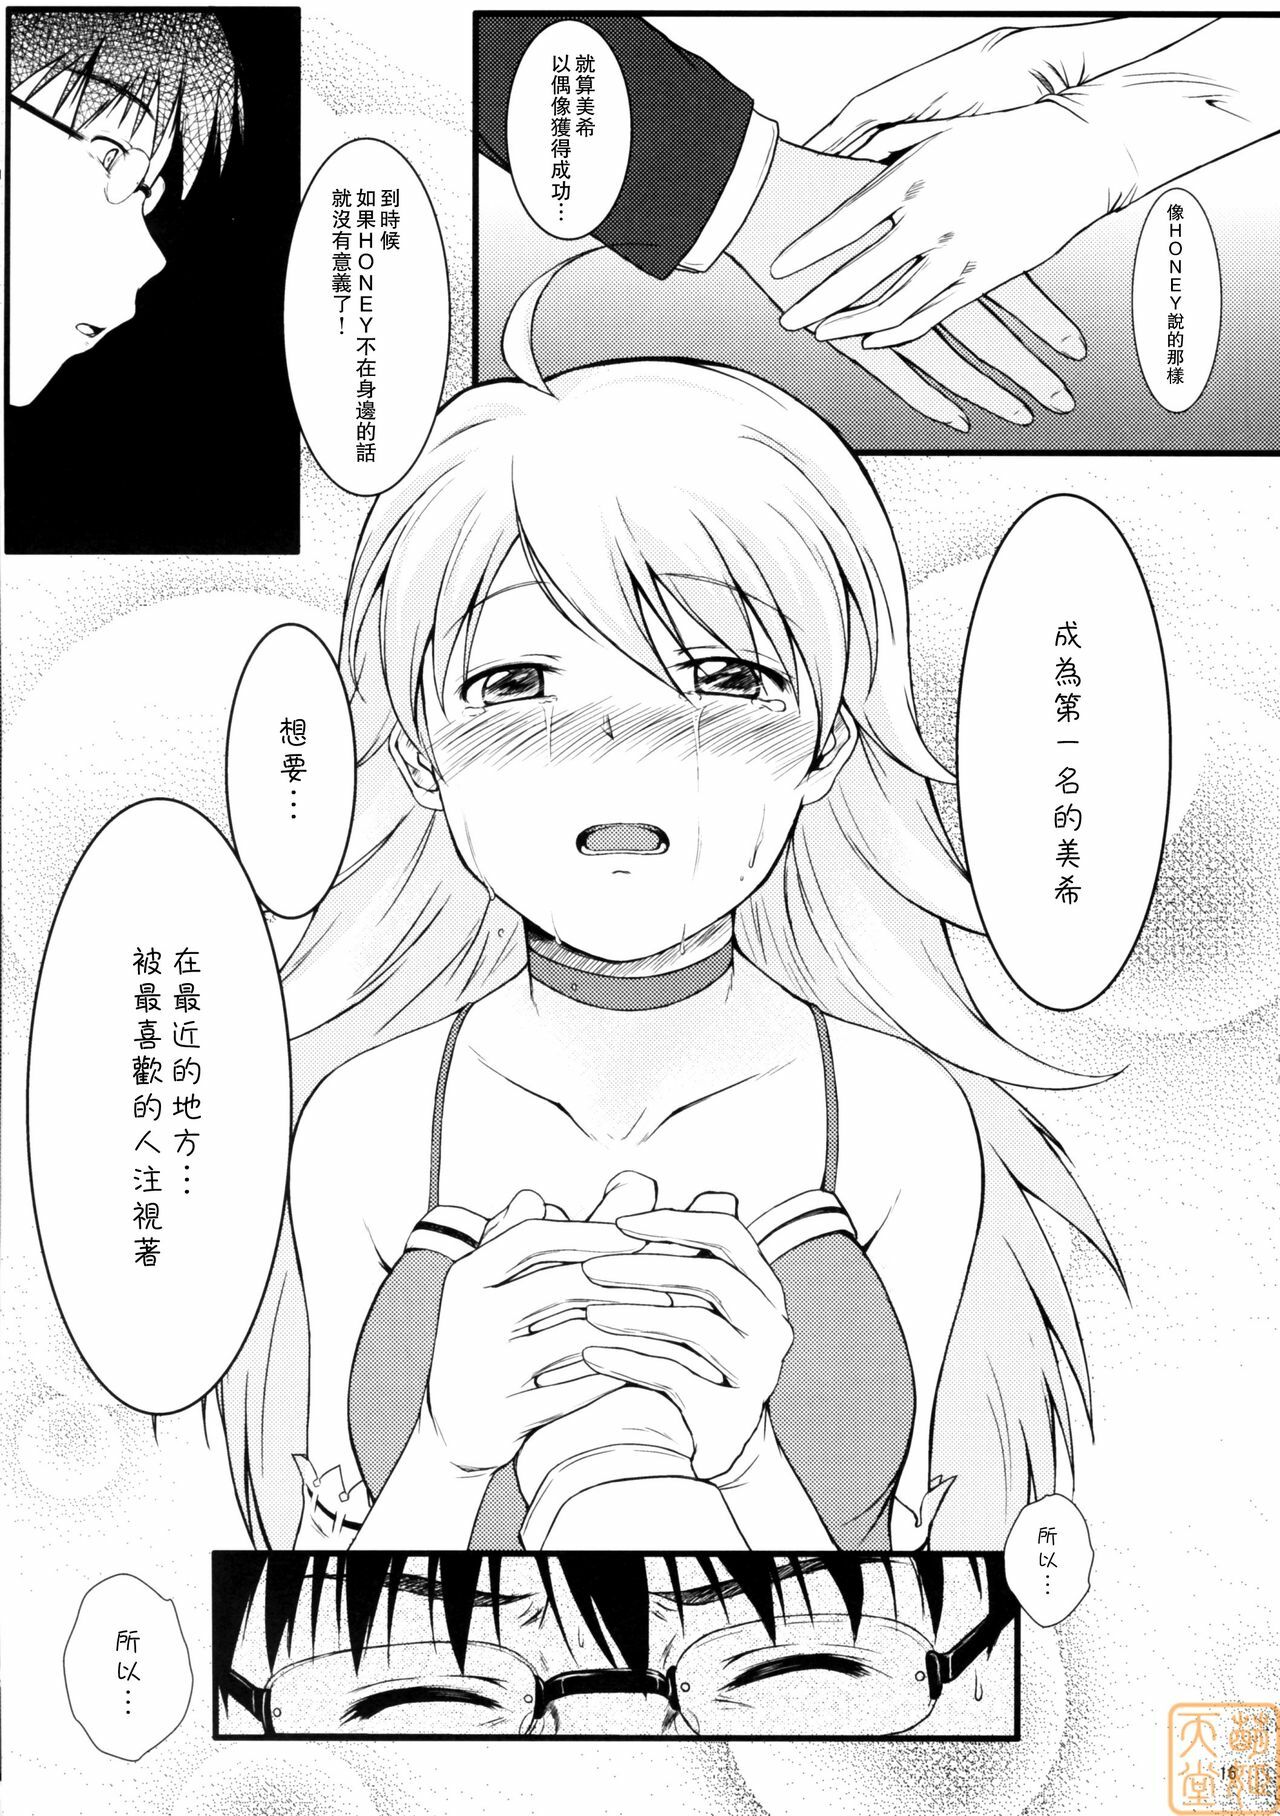 (C75) [Count2.4 (Nishi)] Love x 2 Shining Star (THE iDOLM@STER) [Chinese] [萌姬天堂] page 15 full